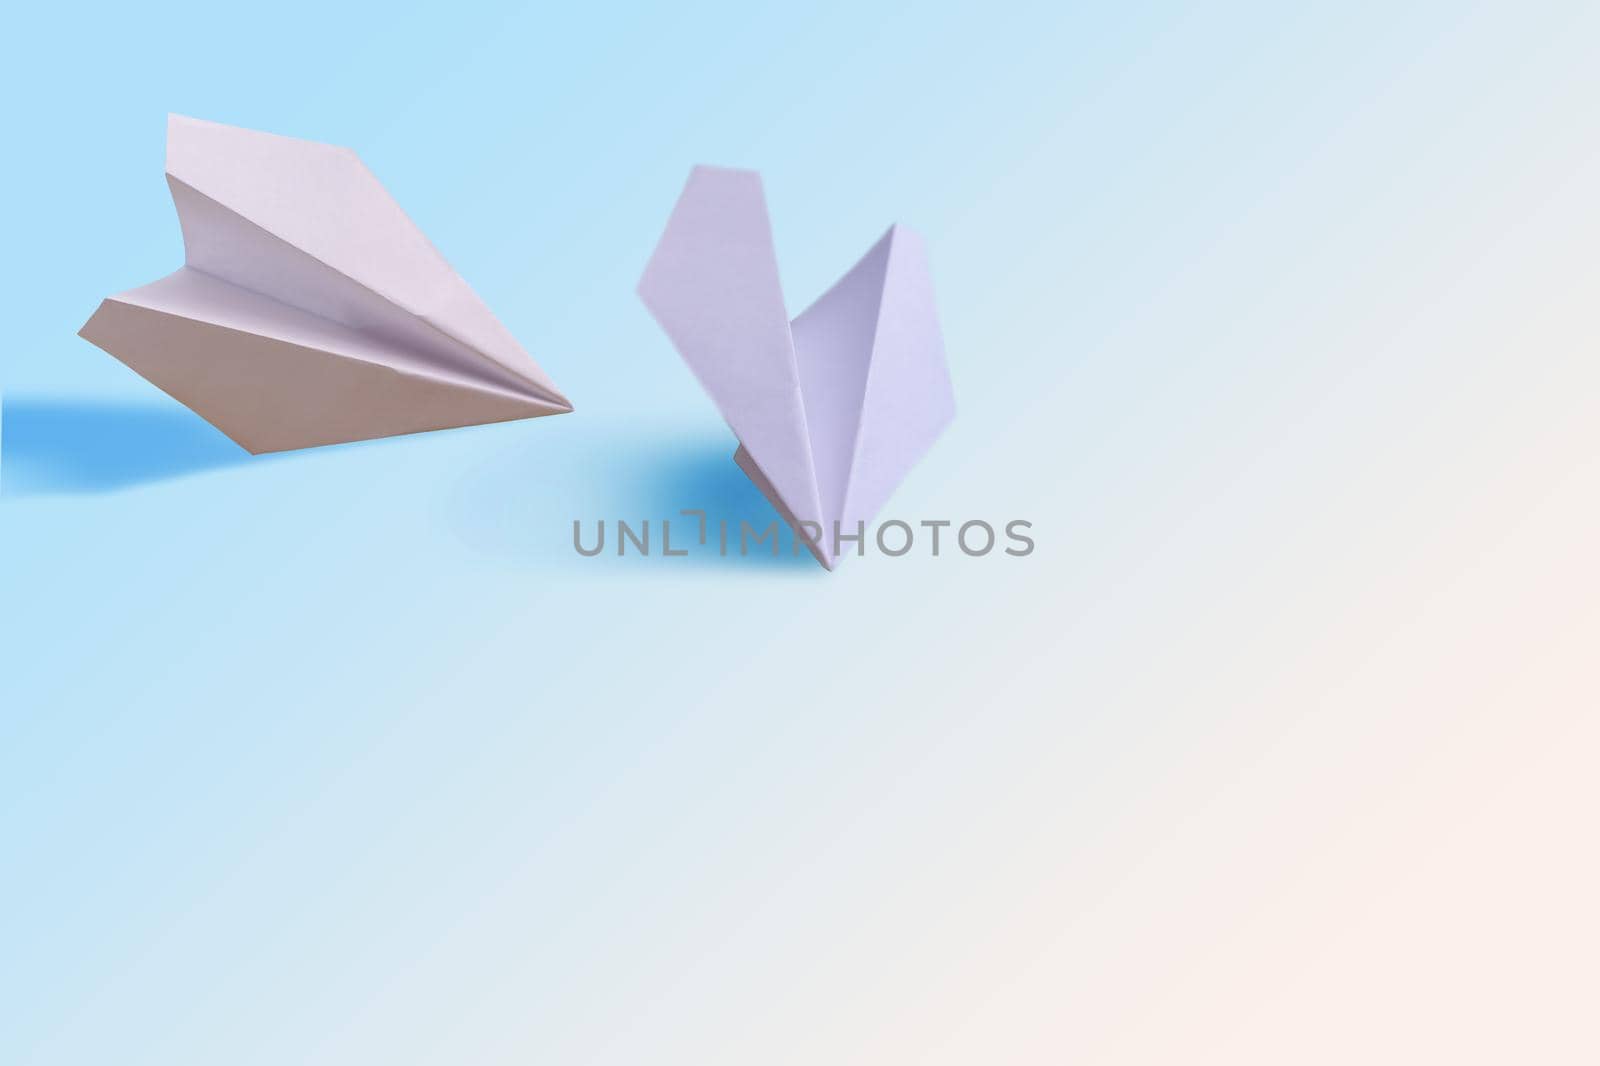 two paper planes on a white background by Andelov13